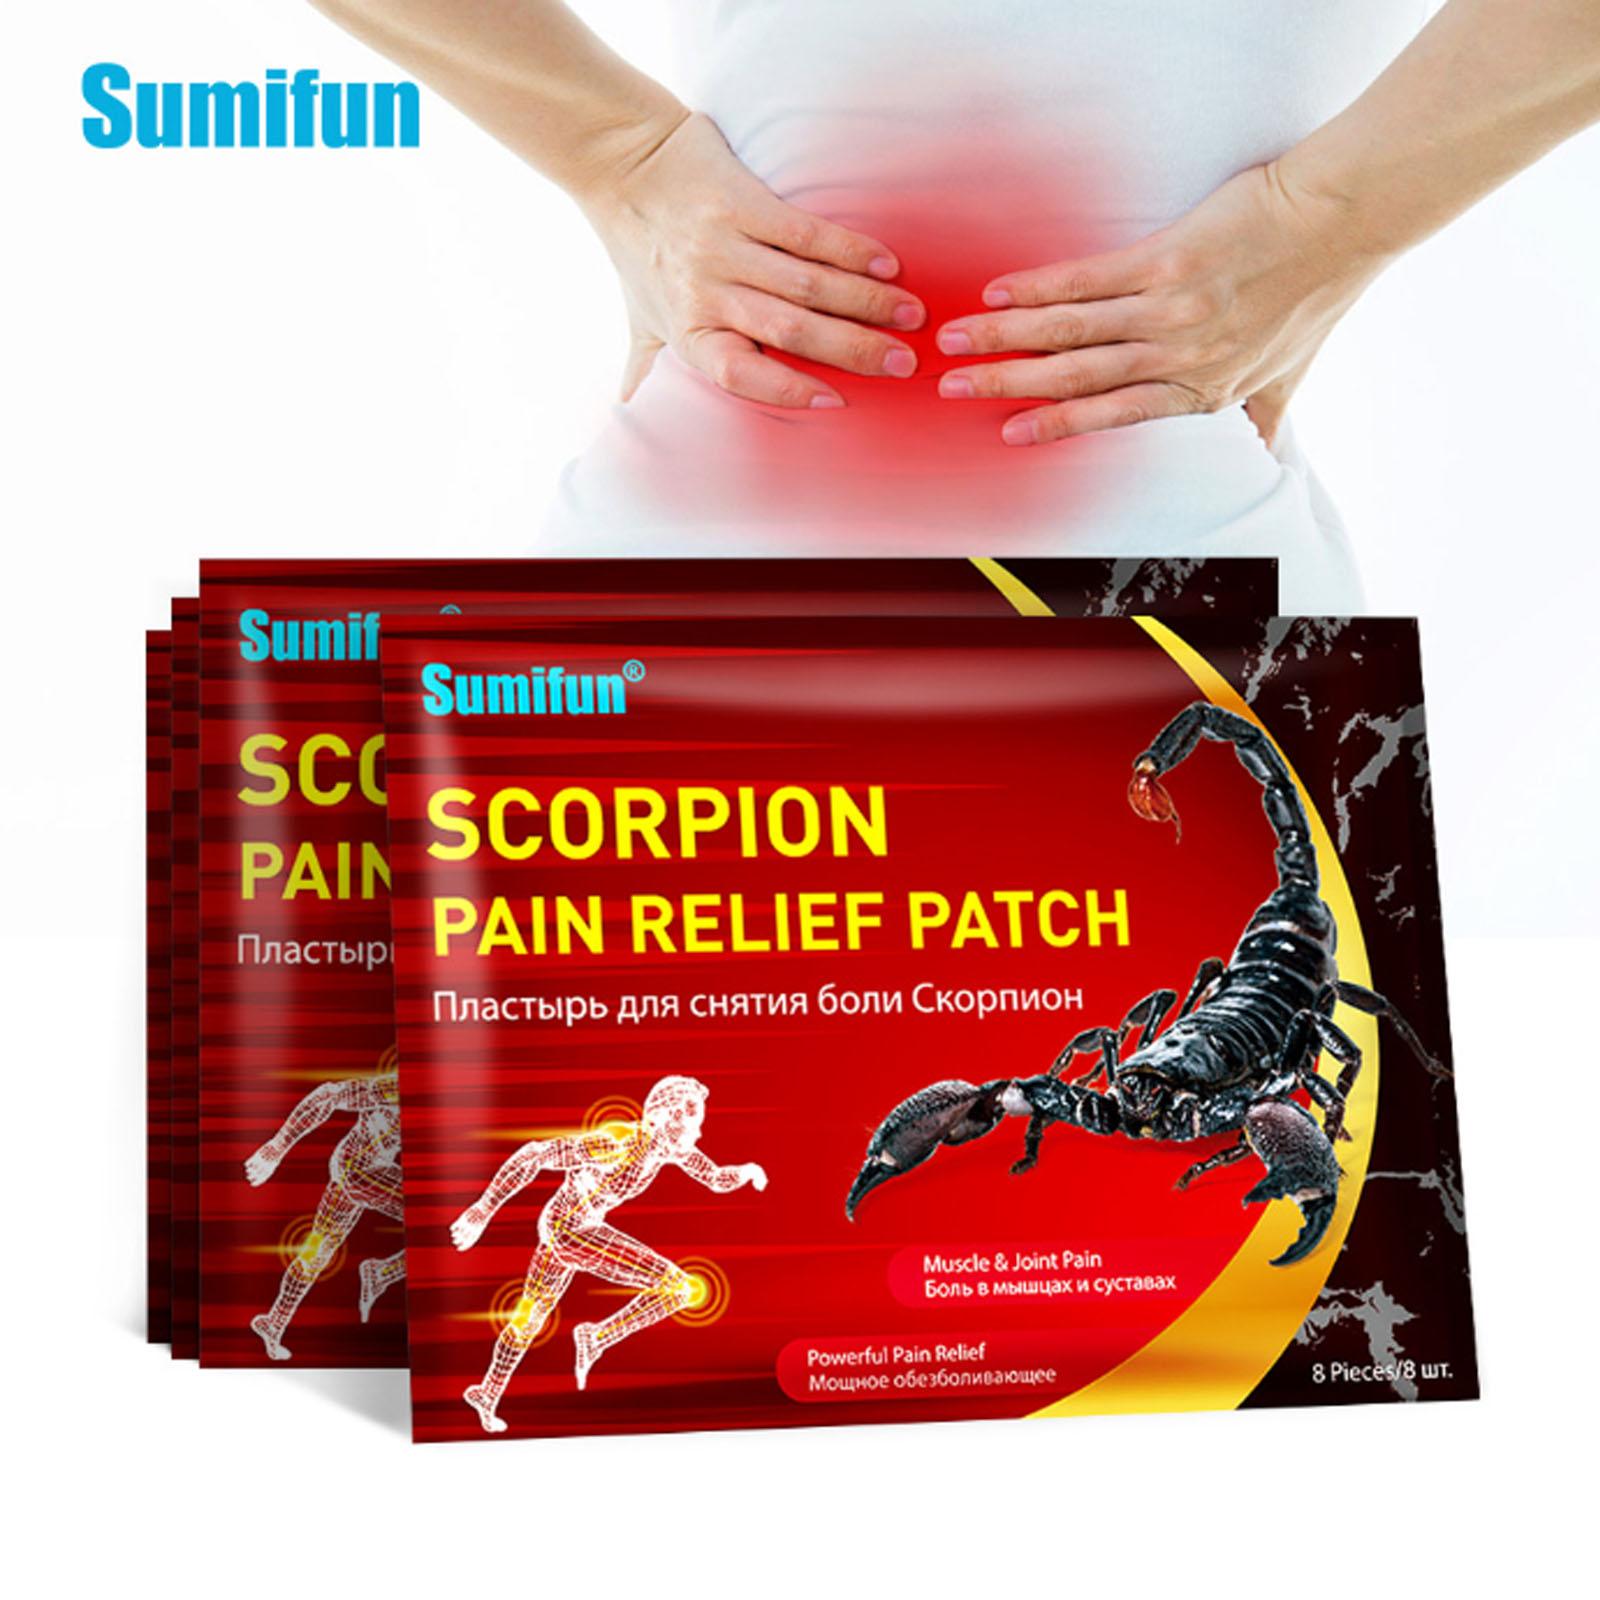 Sumifun 8 Patches Pain Relief Patch Shoulder Neck Leg Waist Care Patches Stickers